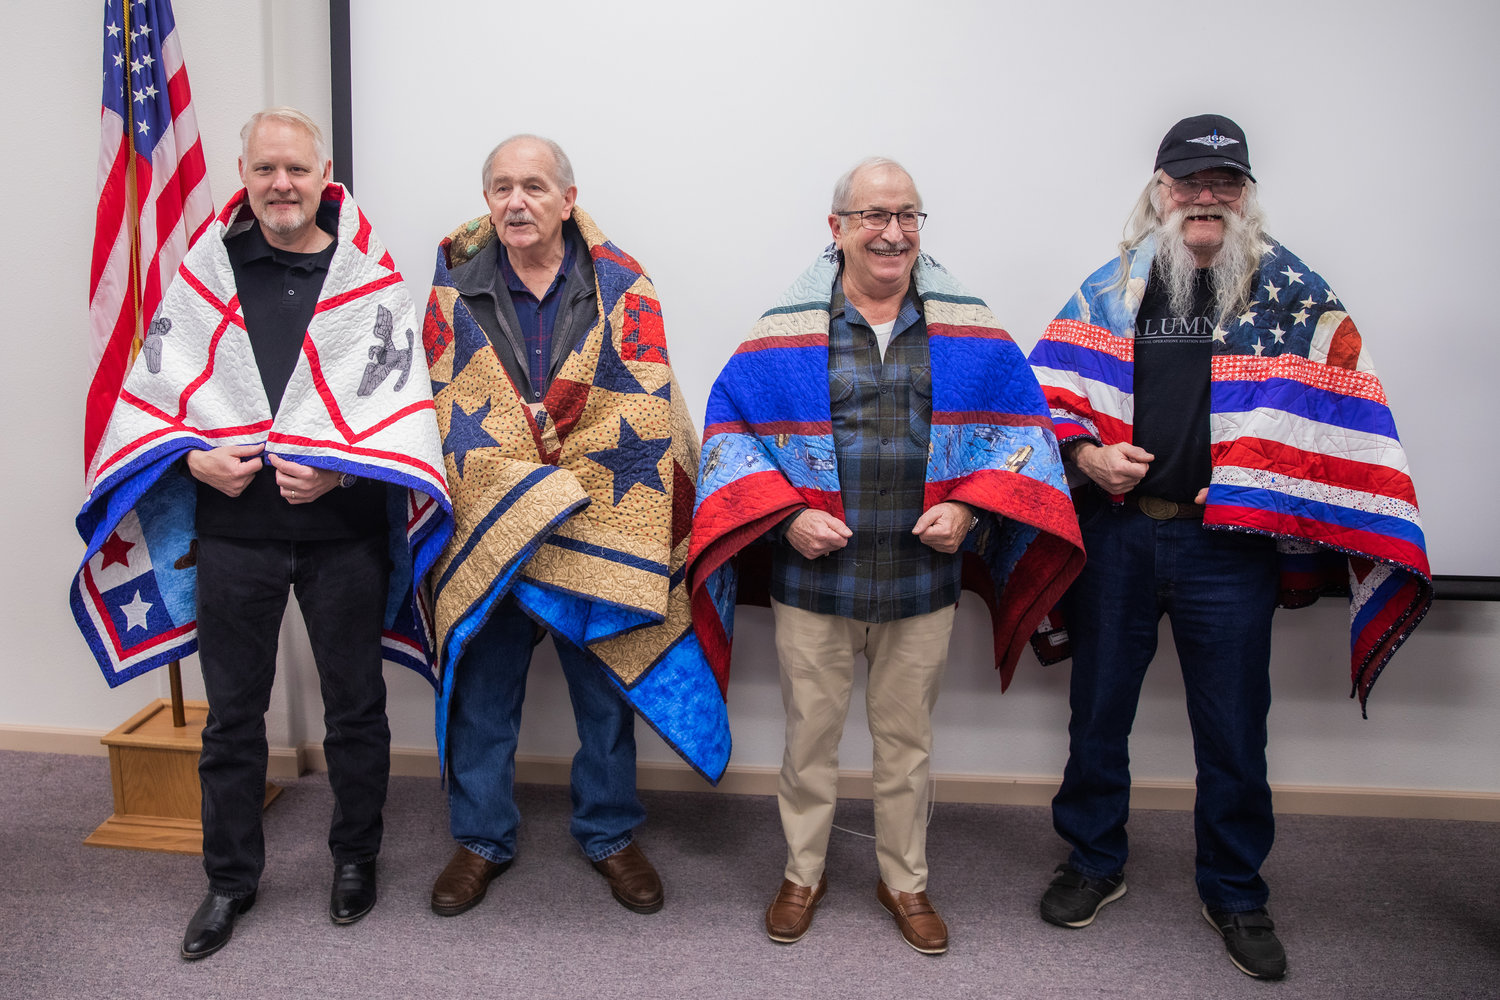 From left, Col. Patrick Taylor, Michael McCoy, Donald Schmidt and Joseph Bushlack smile for a photo after being presented with Quilts of Valor on Veterans Day during the 25th anniversary of the Veterans Memorial Museum in Chehalis.